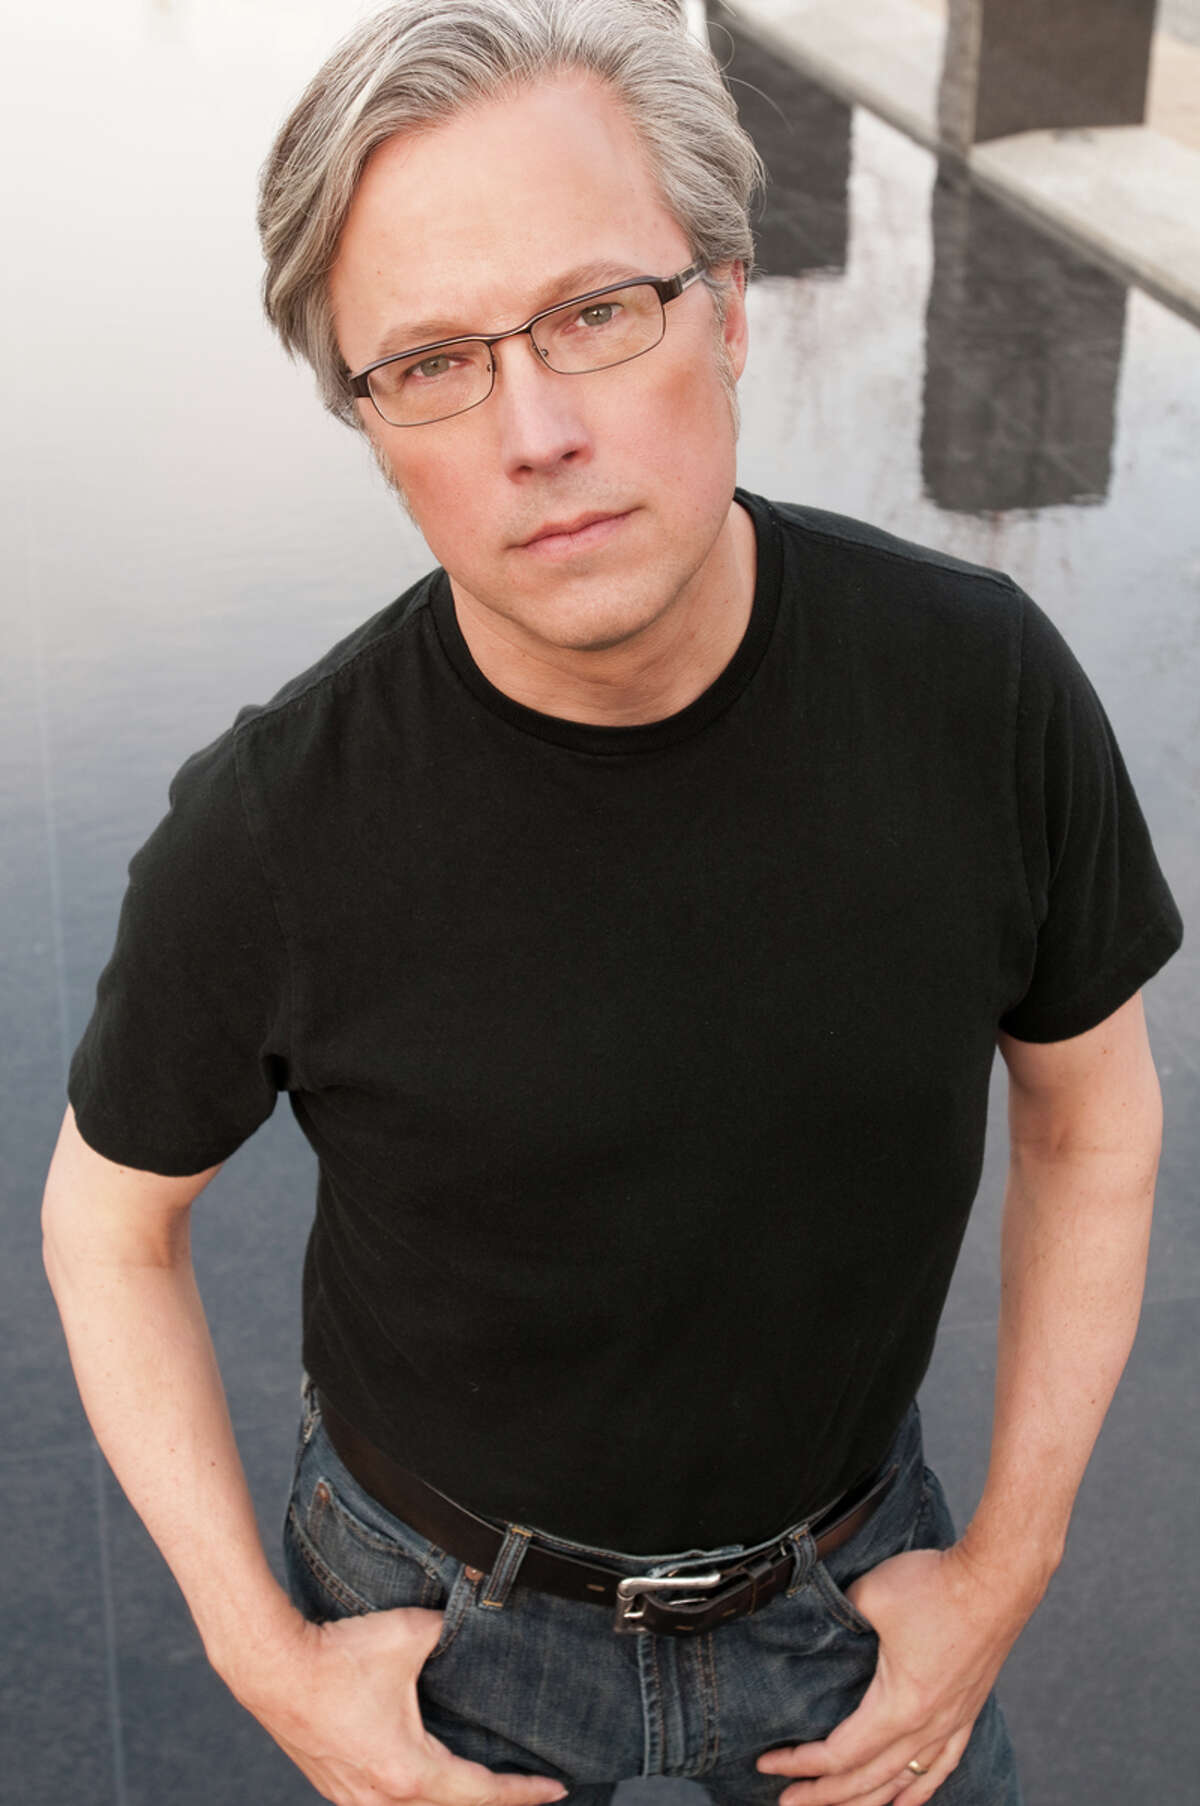 Radney Foster's performance at the Empire Theatre will support a scholarship at St. Luke's Episcopal School named in memory of his father, John R. Foster. COURTESY KATHERINE BOMBOY